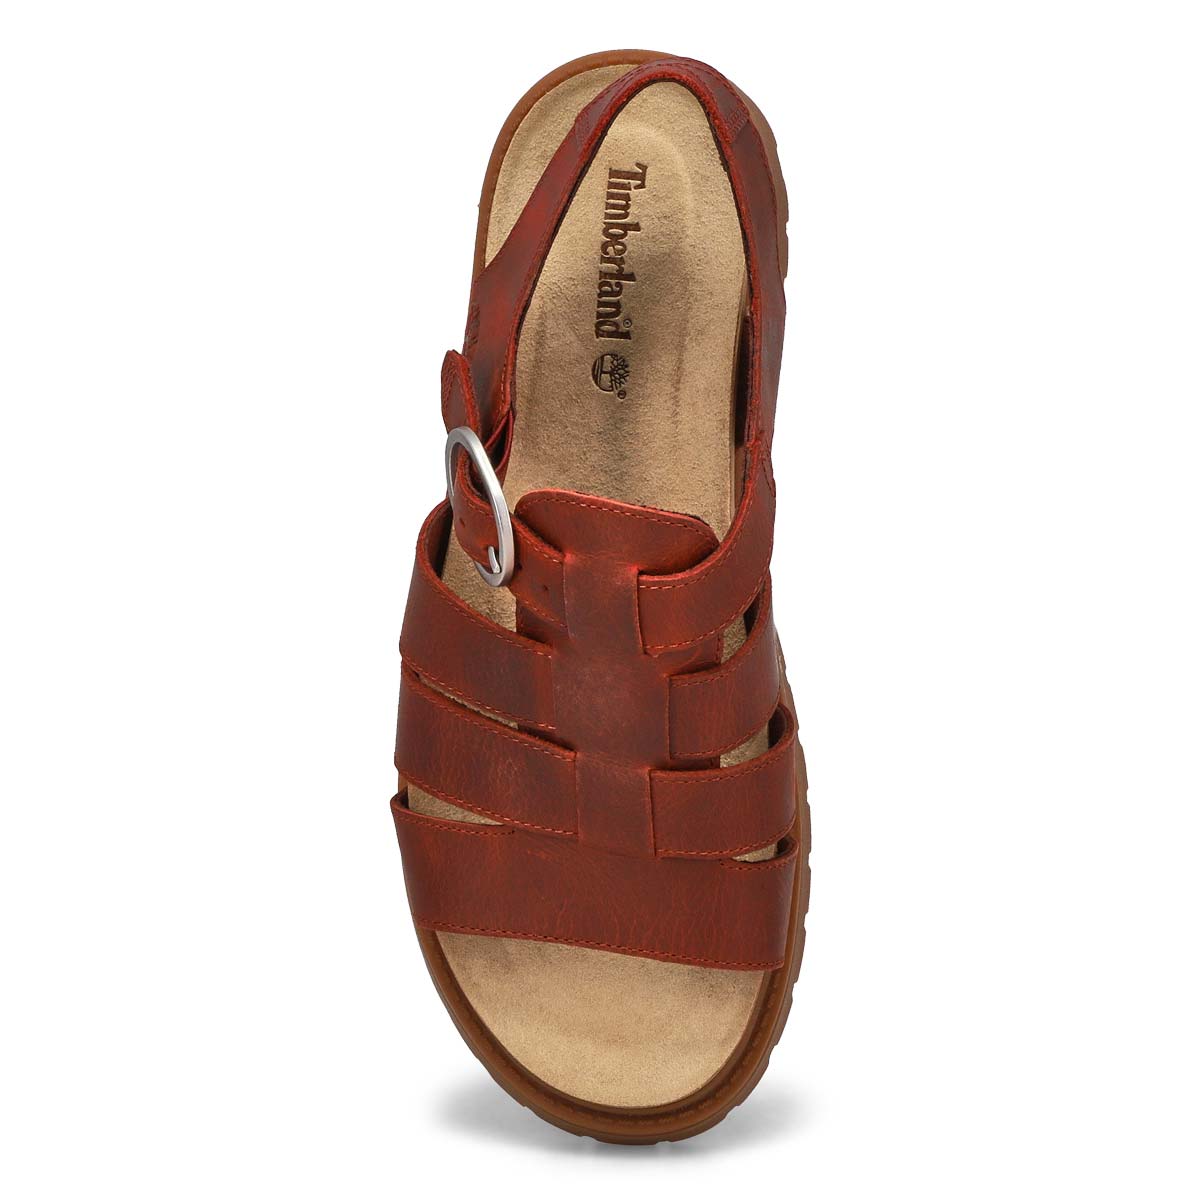 Women's Clairemont Way Casual Sandal - Dark Red